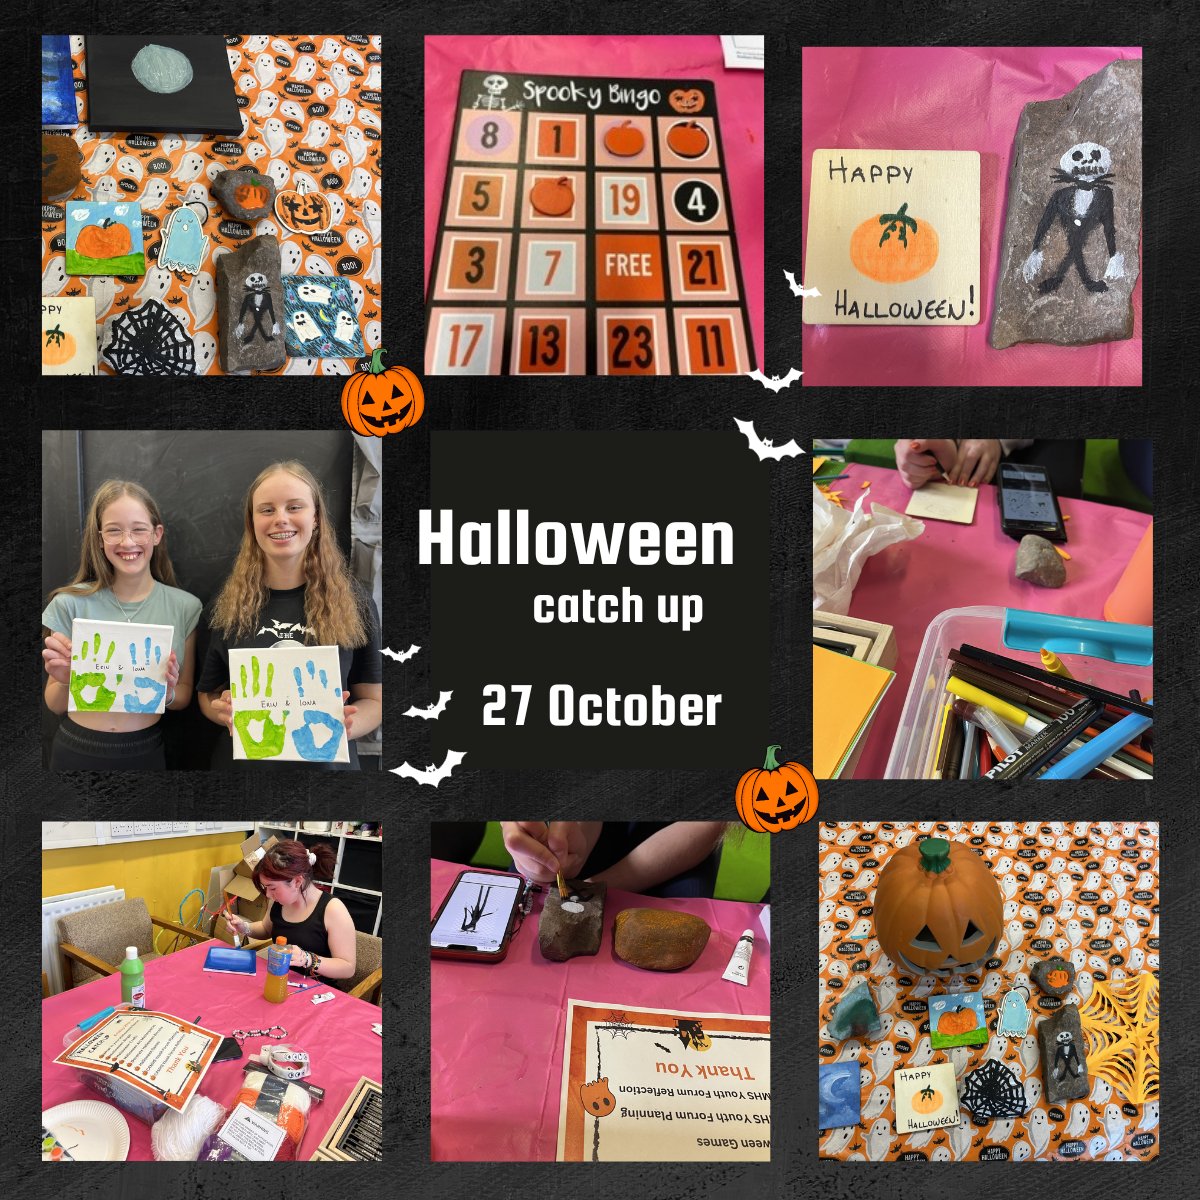 Great Halloween themed catch up 🎃for the CAMHS Arts & Wellbeing Group, lots of laughter, making new connections whilst creating spooky artwork👻 #CAMHSParticipation #ArtsandWellbeing #Halloween #Fun #MentalHealthMatters